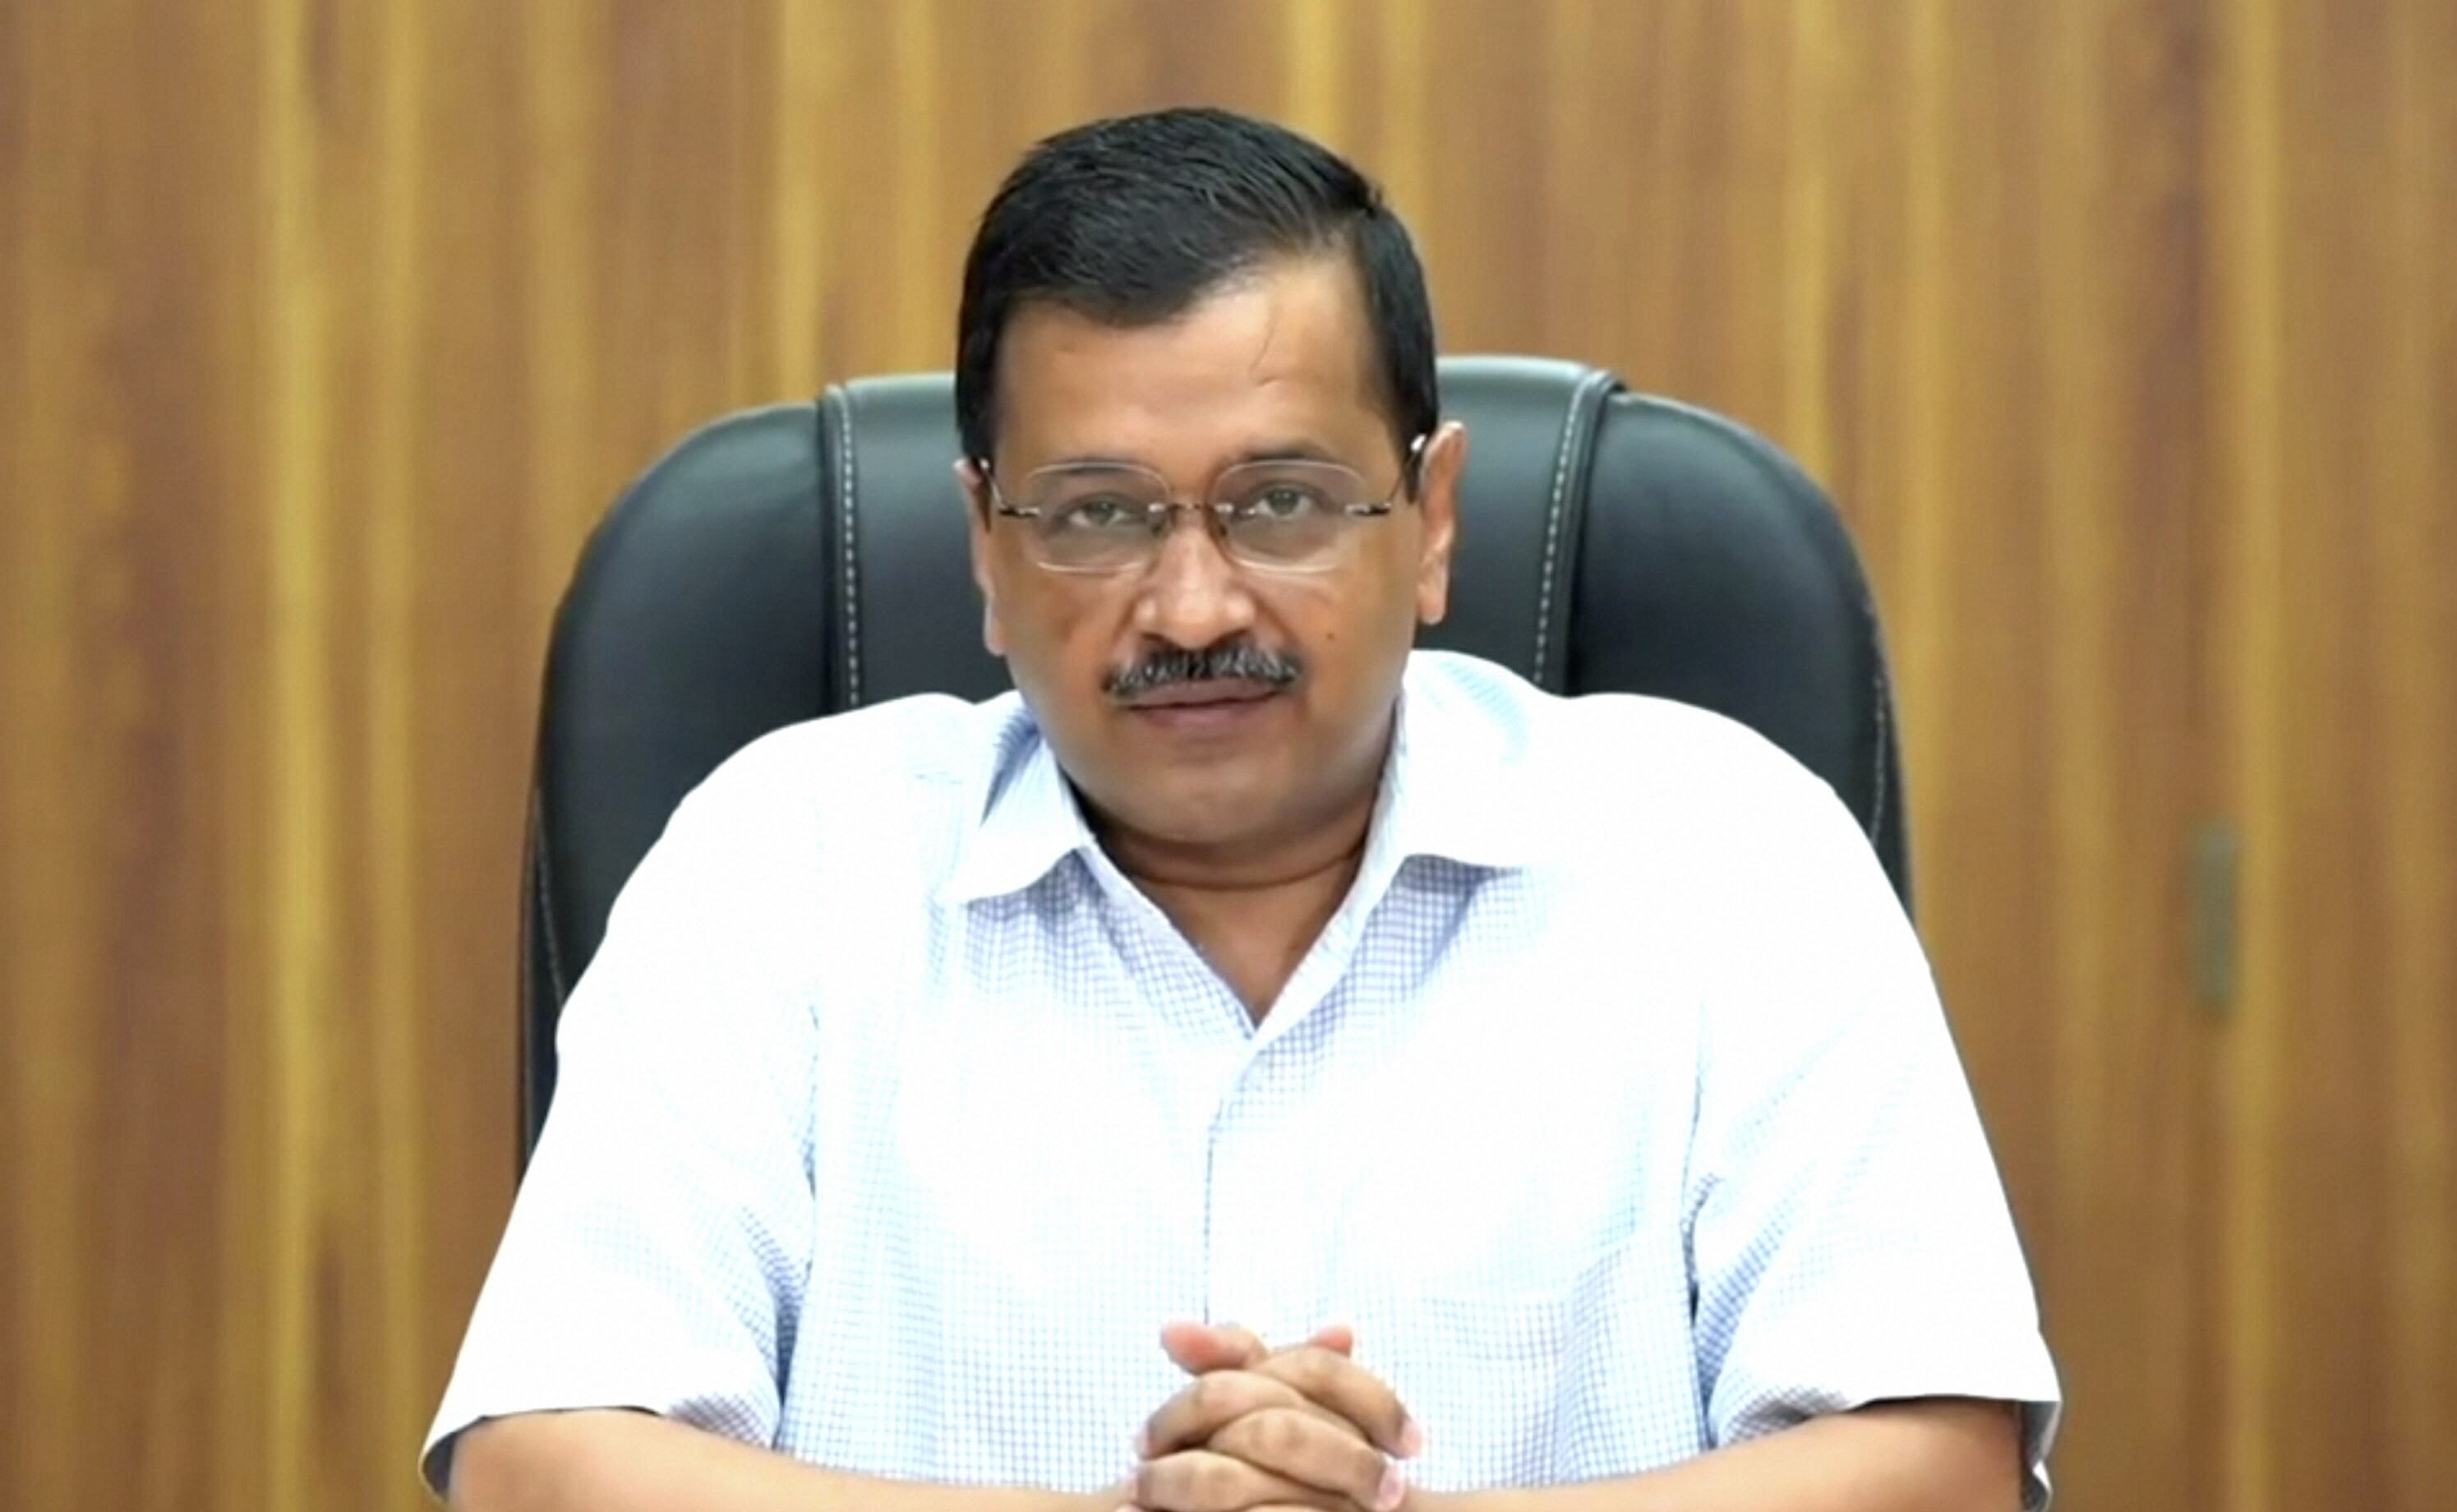 Covid cases rising in Delhi but no need to panic: Kejriwal